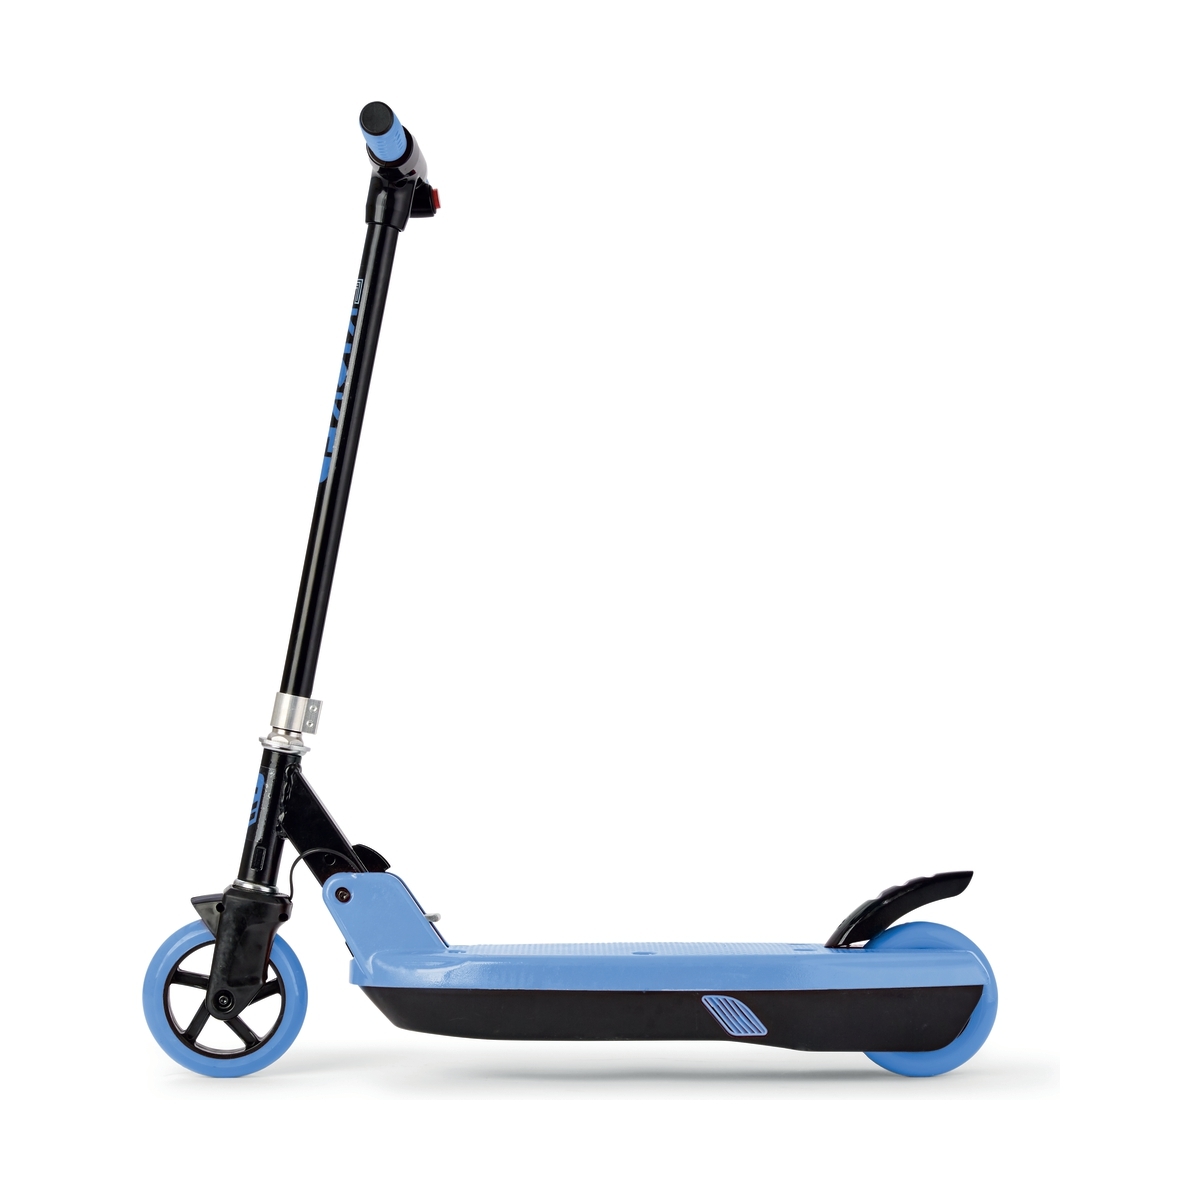 kmart scooter